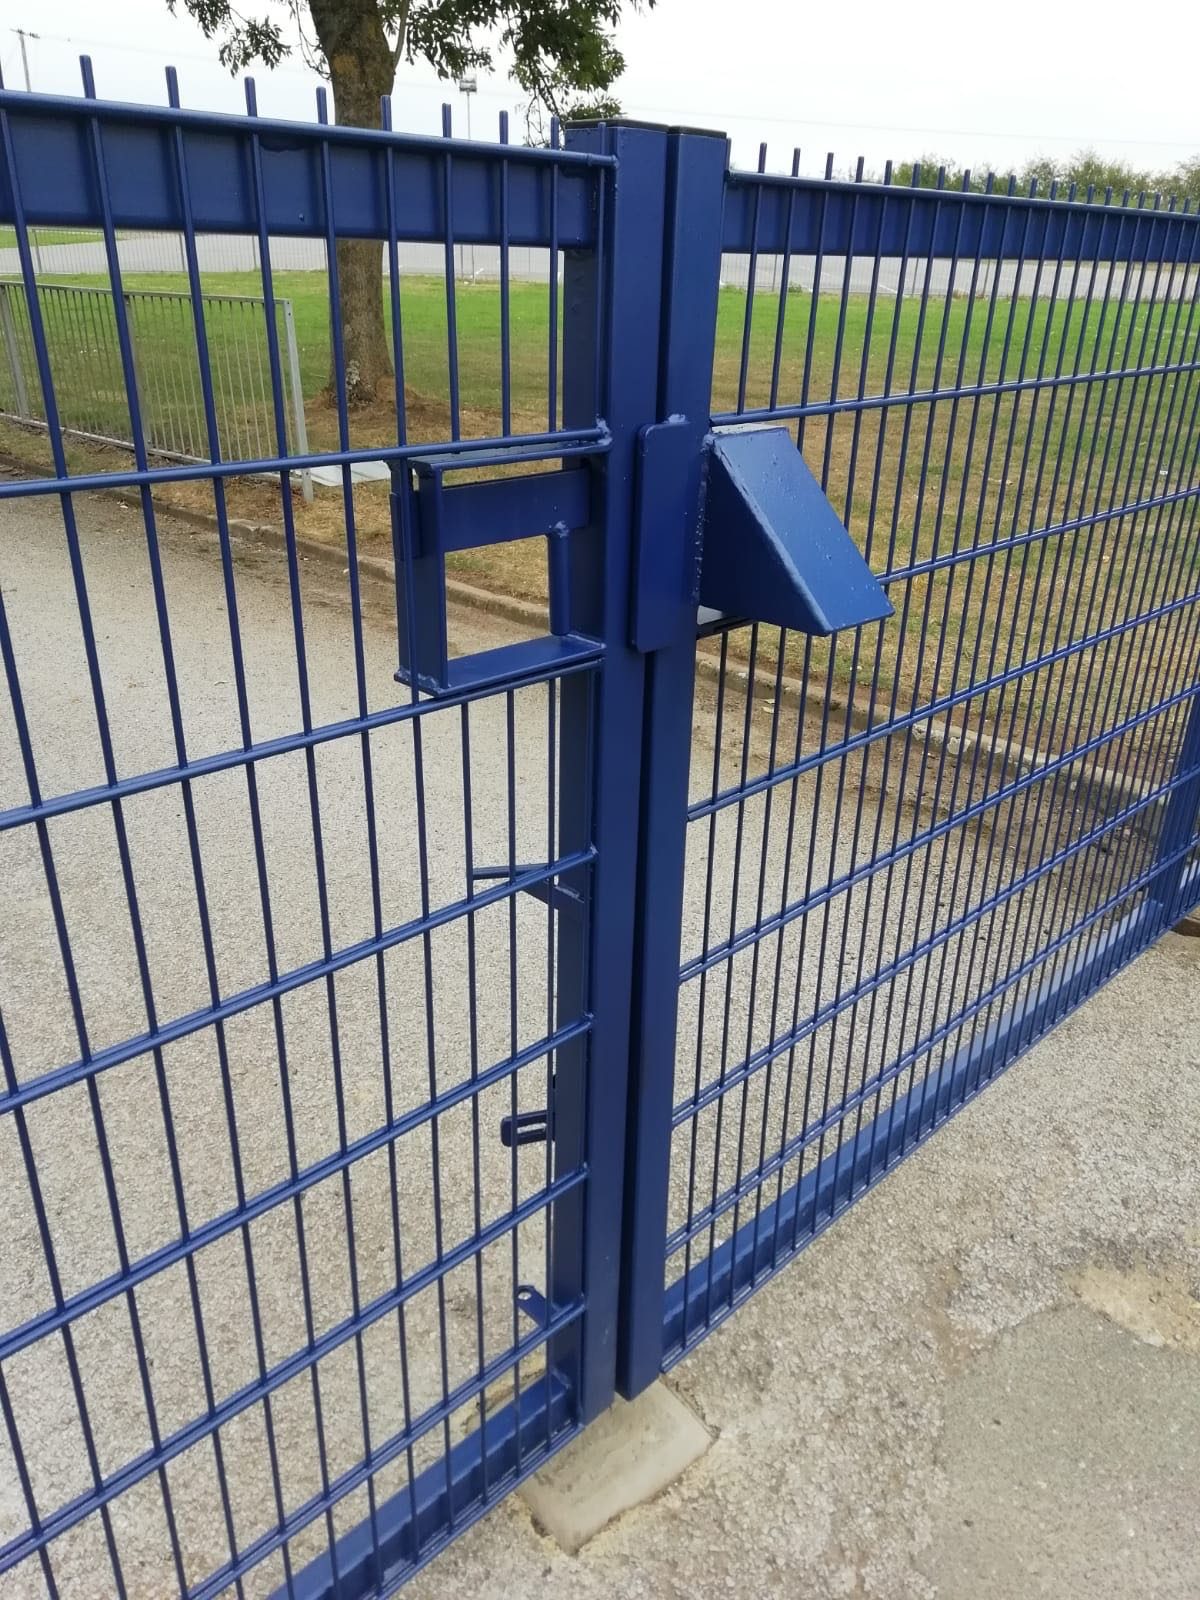 Sports club gate installers Bedfordshire